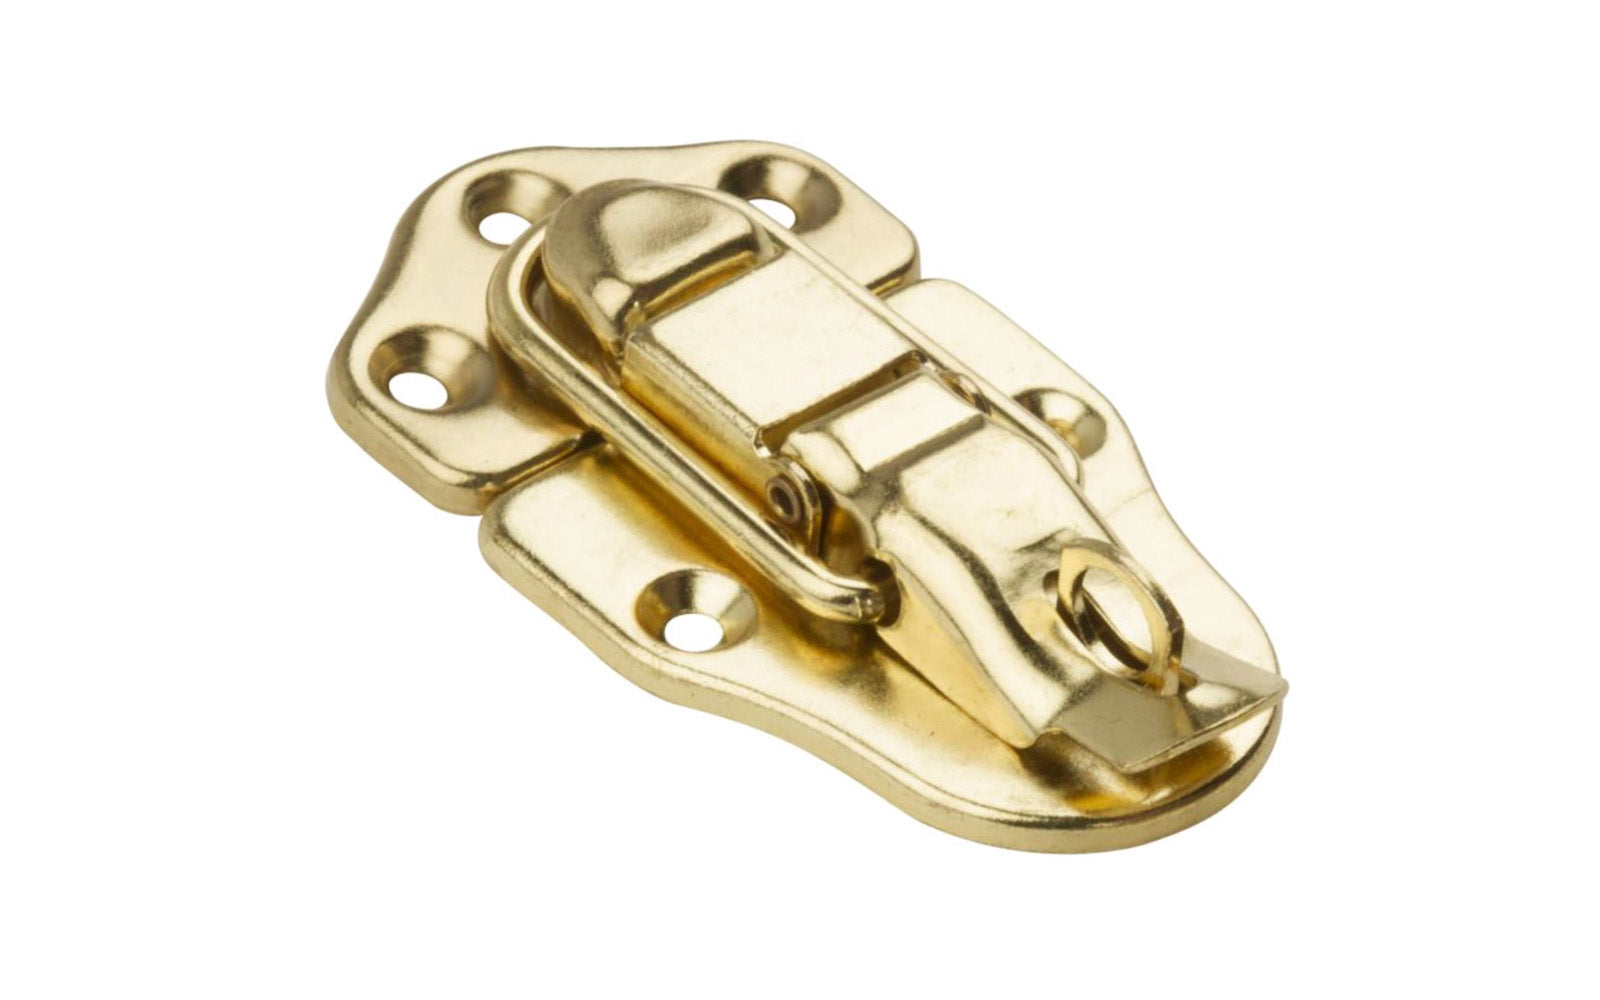 This Brass-Plated Lockable Draw Catch is made of steel material with brass-plated finish. Latch for a tight secure closing. Surface mount. Use to secure trunks, chests, cases, tool boxes, & other items. 1-3/4